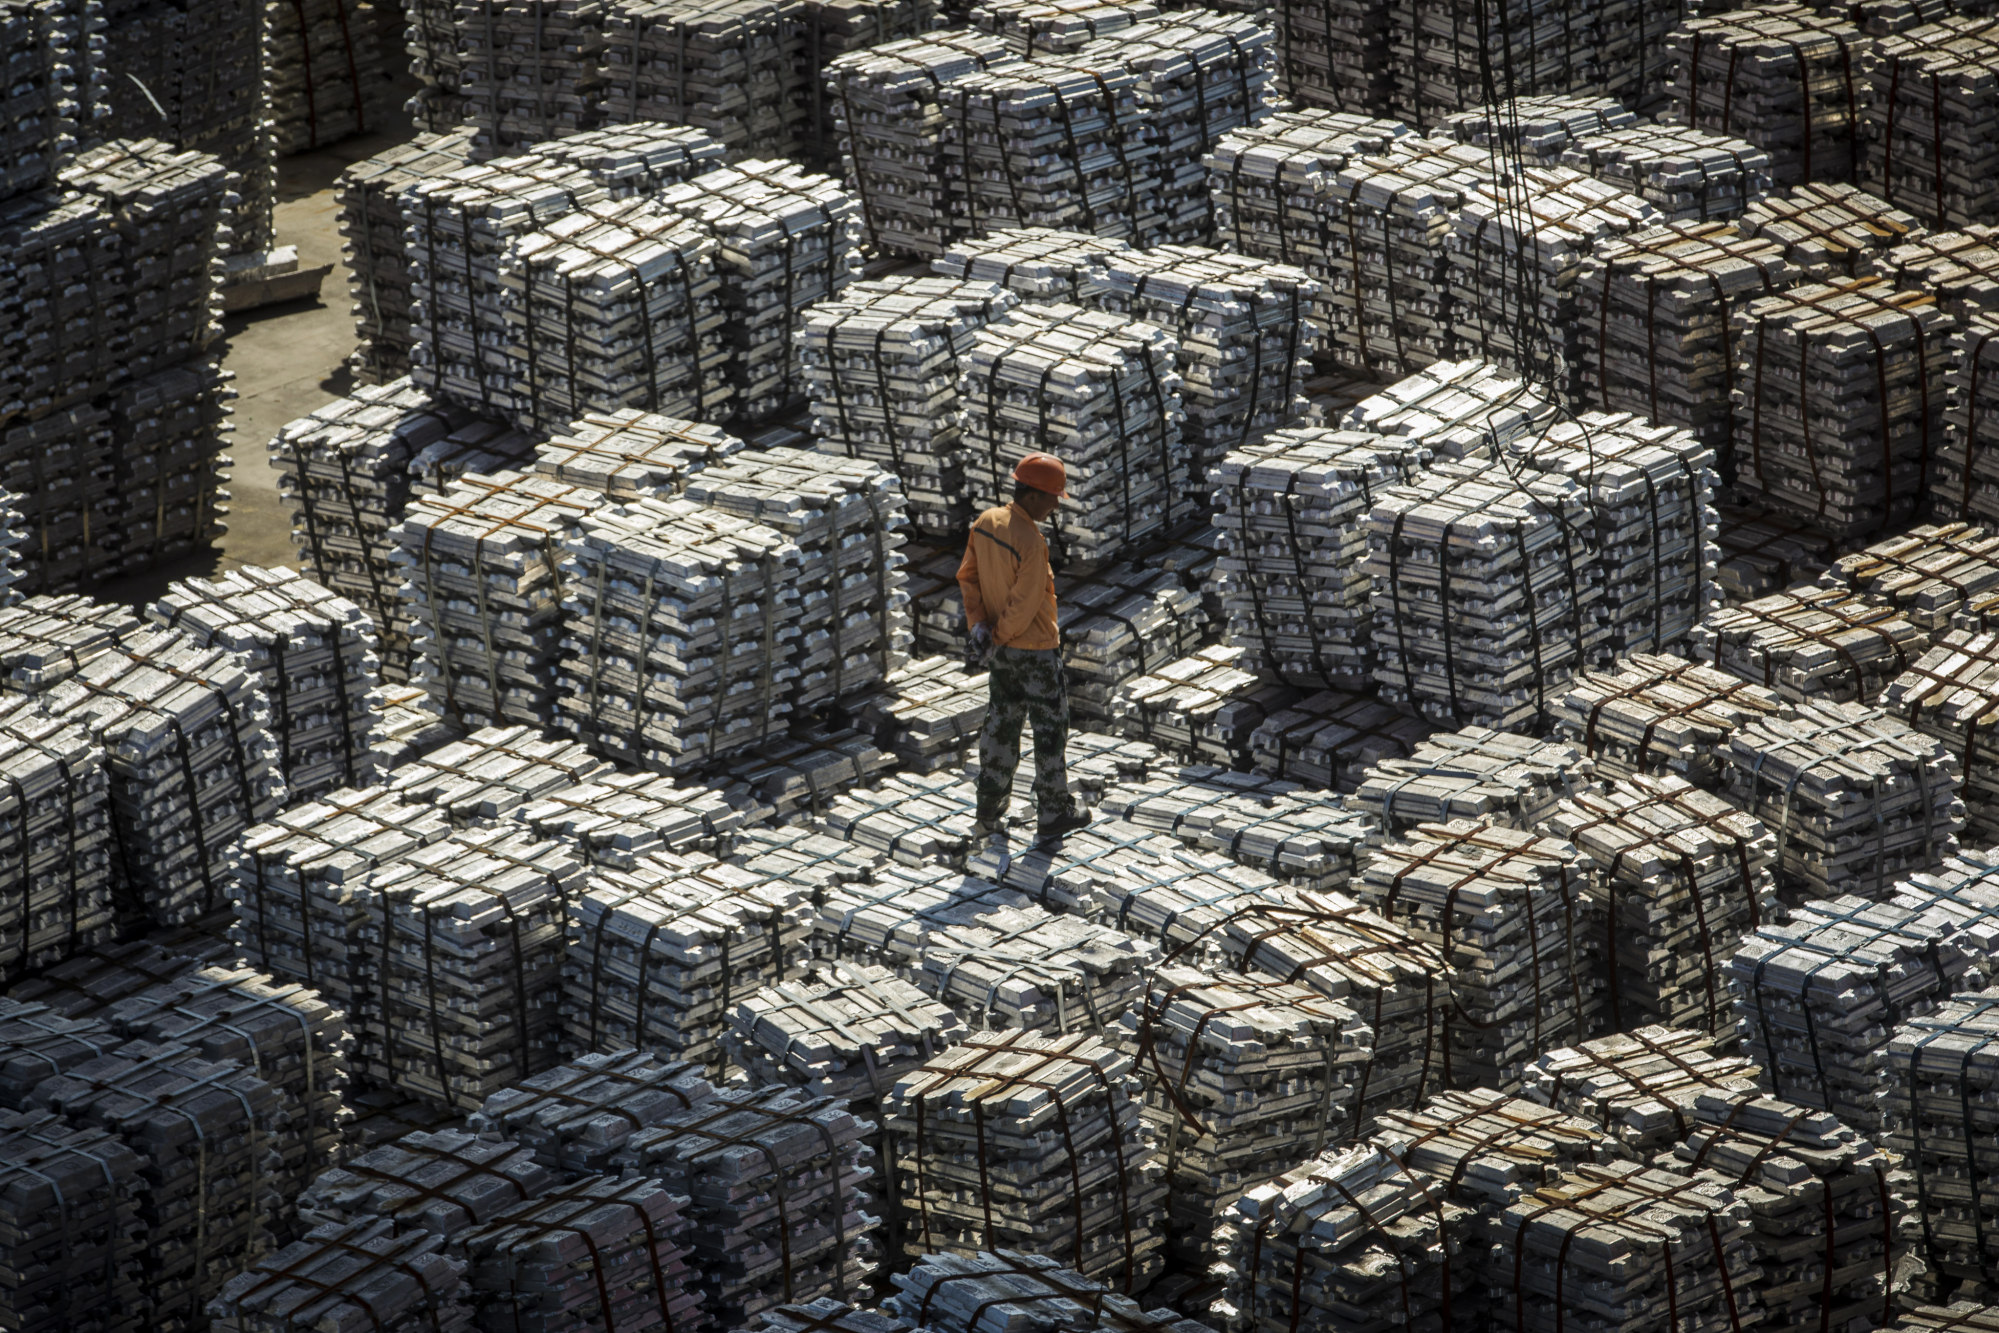 Views of Aluminum Stockyards as China, U.S. Roll Out New Tariffs